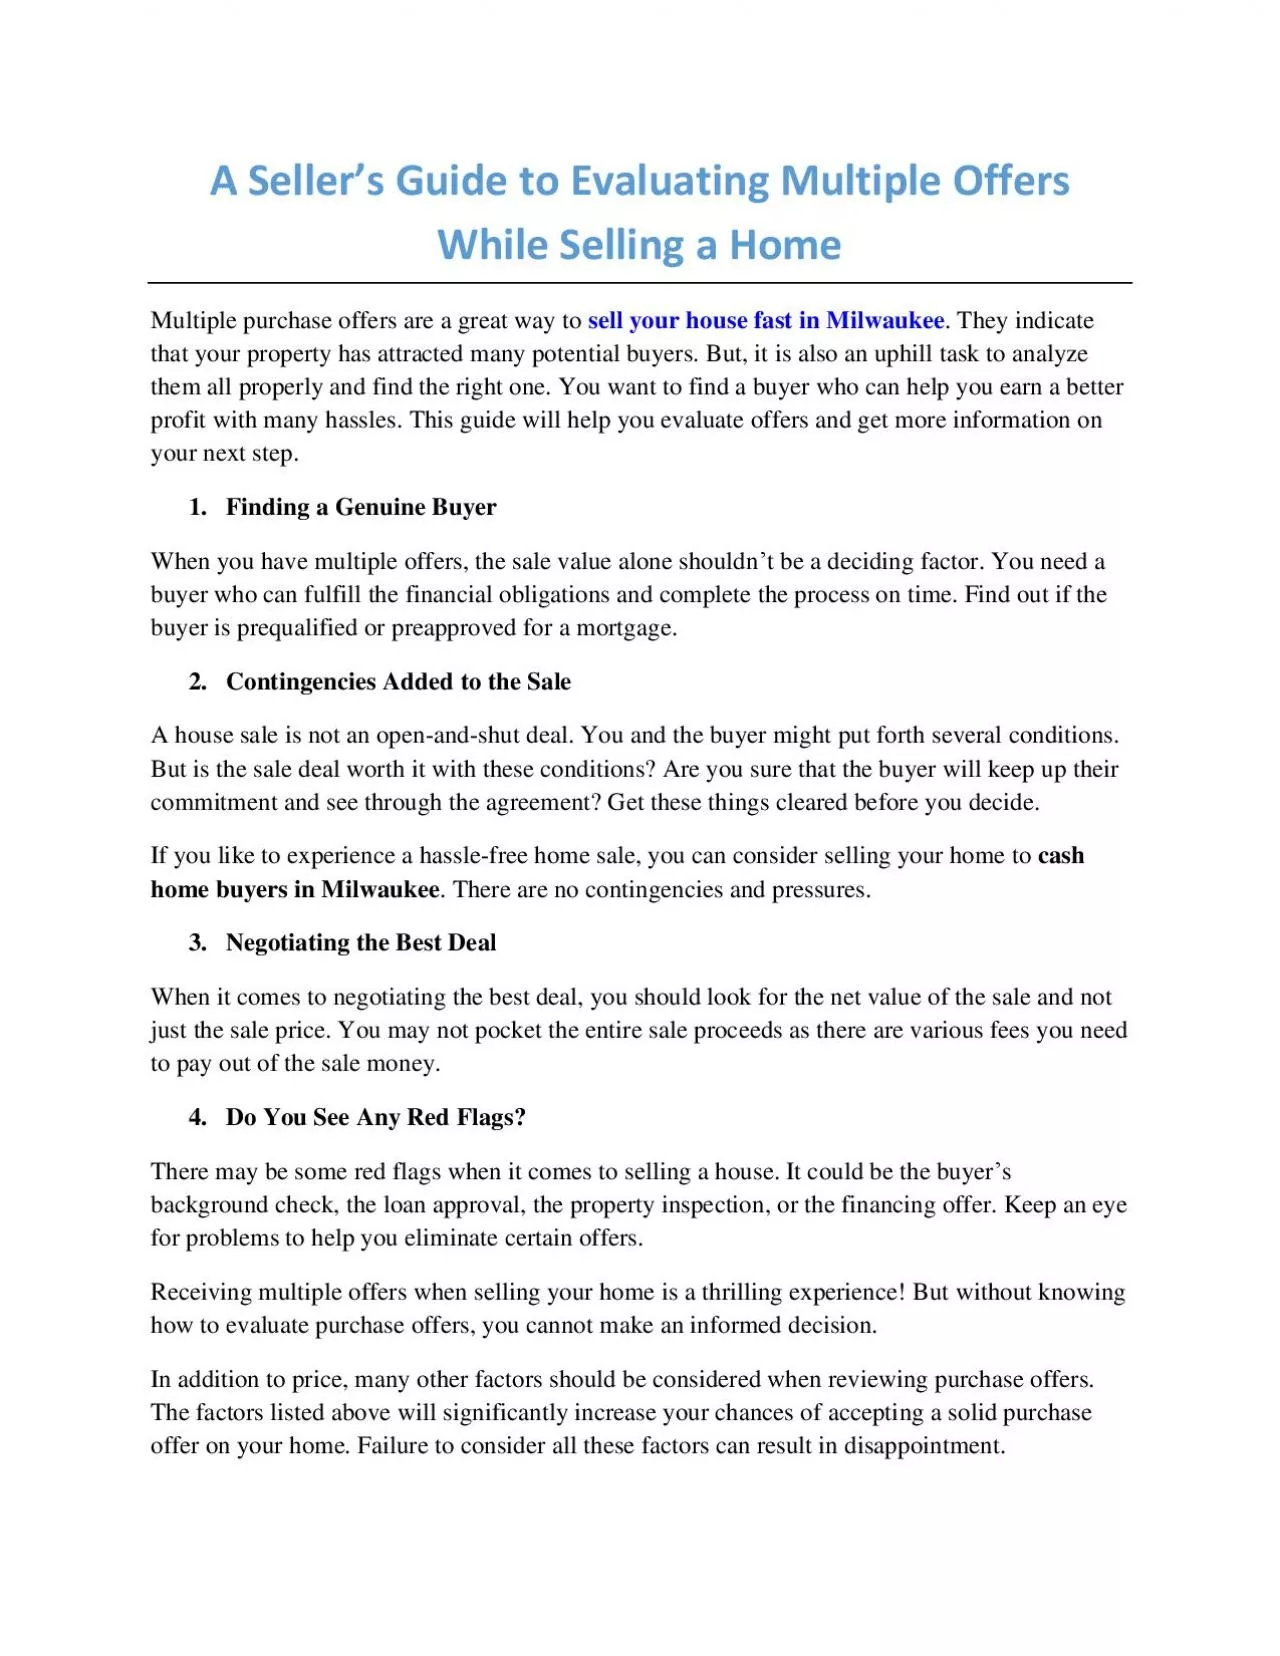 A Seller’s Guide to Evaluating Multiple Offers While Selling a Home